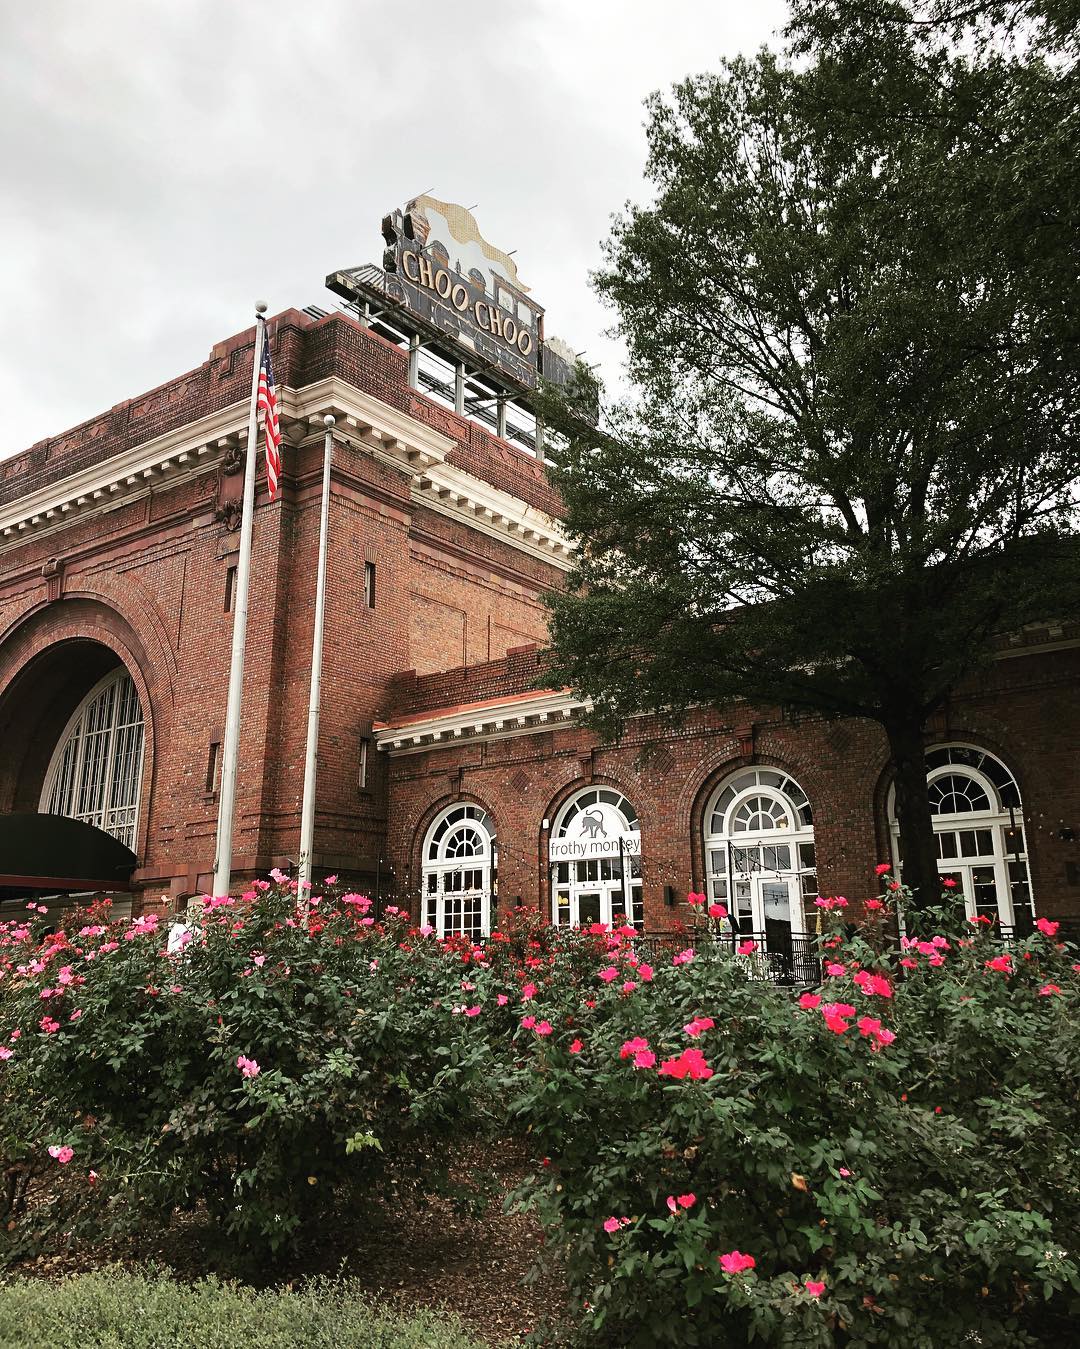 Exterior of the Brick Chatanooga Choo Choo Hotel. Photo by Instagram user @sarahkmc